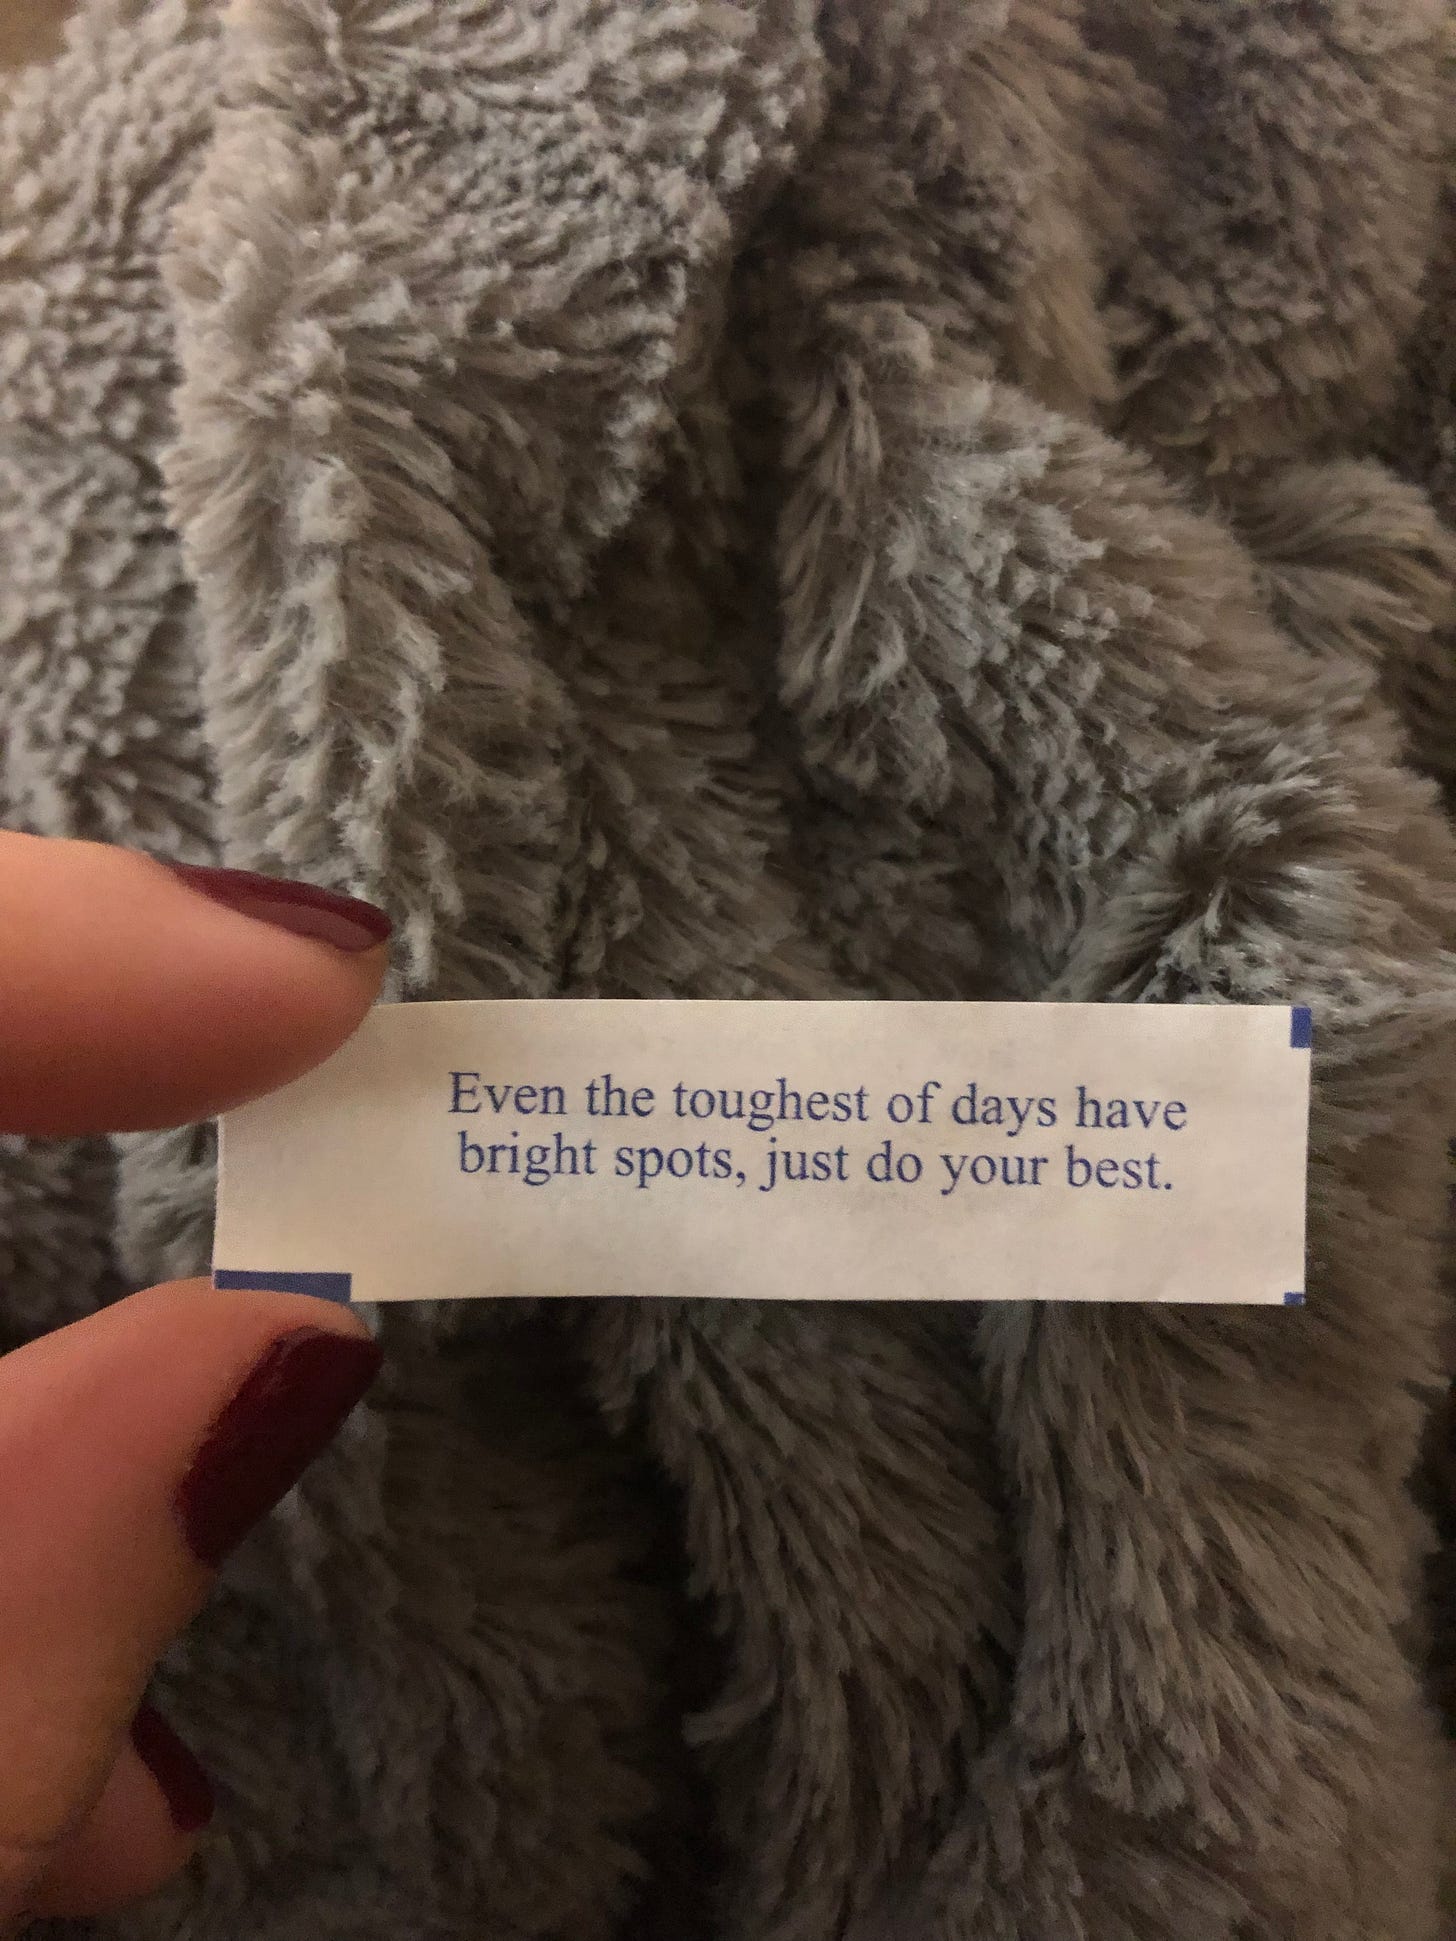 fortune says "even the toughest of days have bright spots, just do your best." 